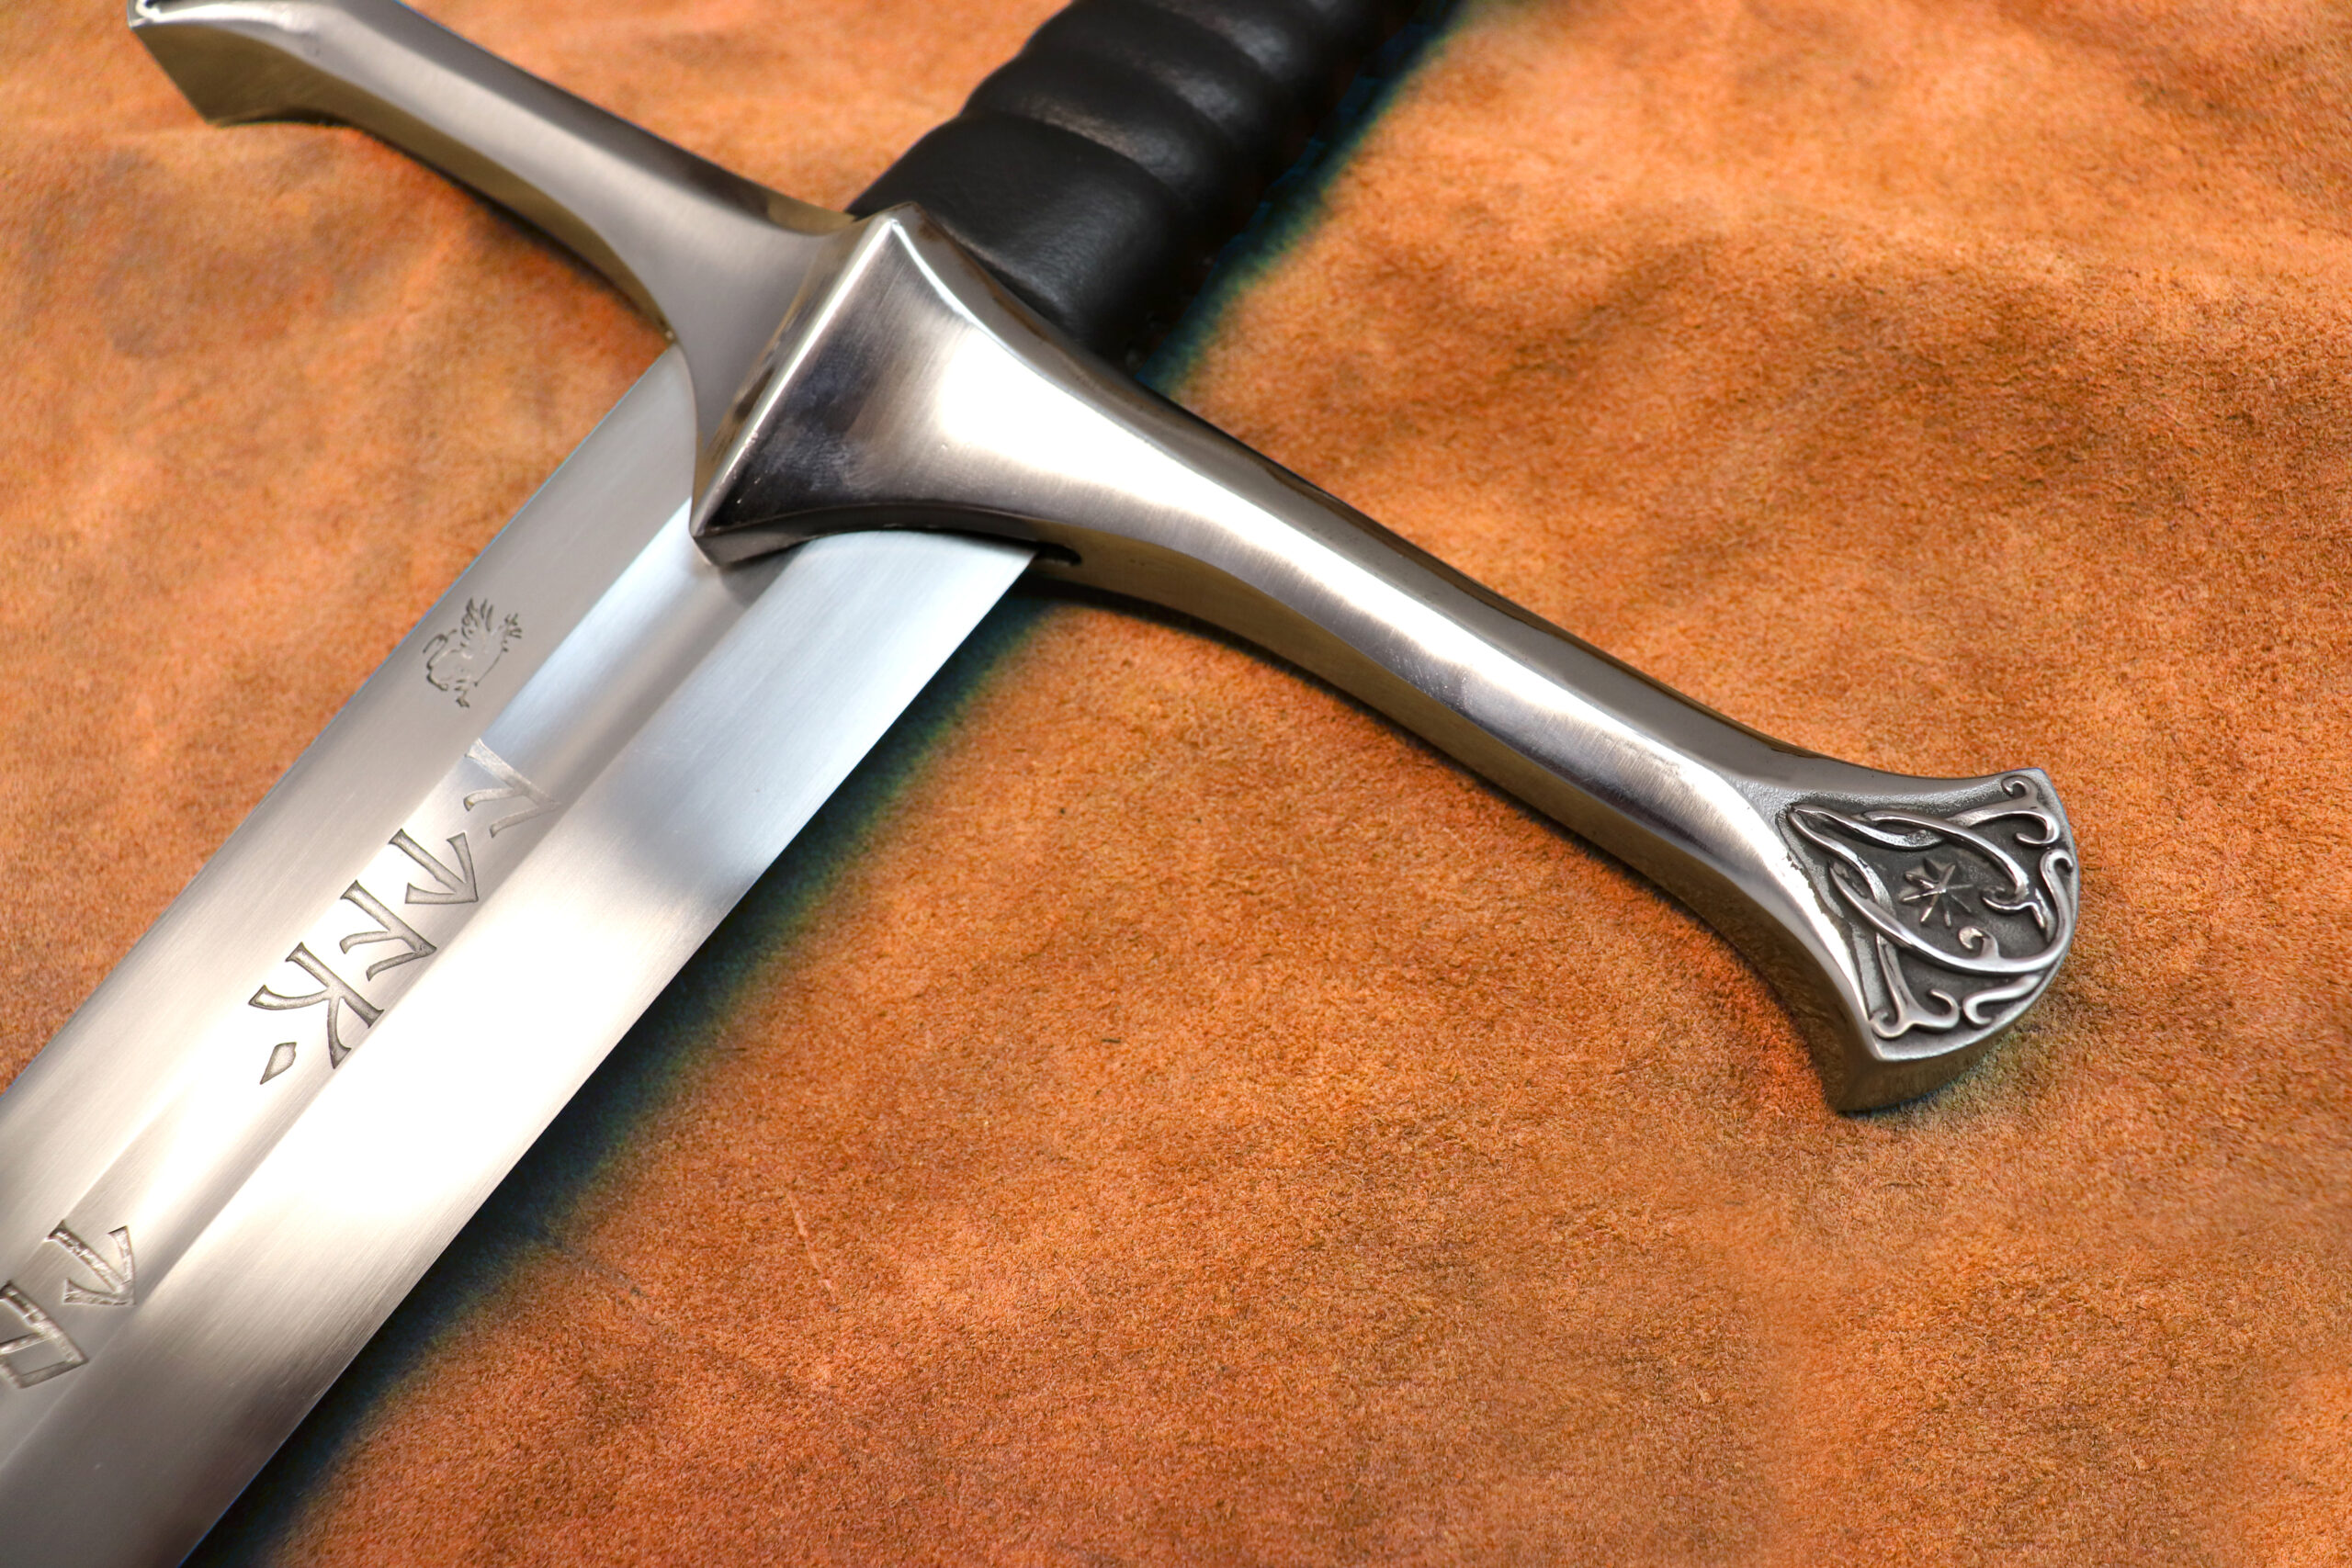 The Anduril Sword